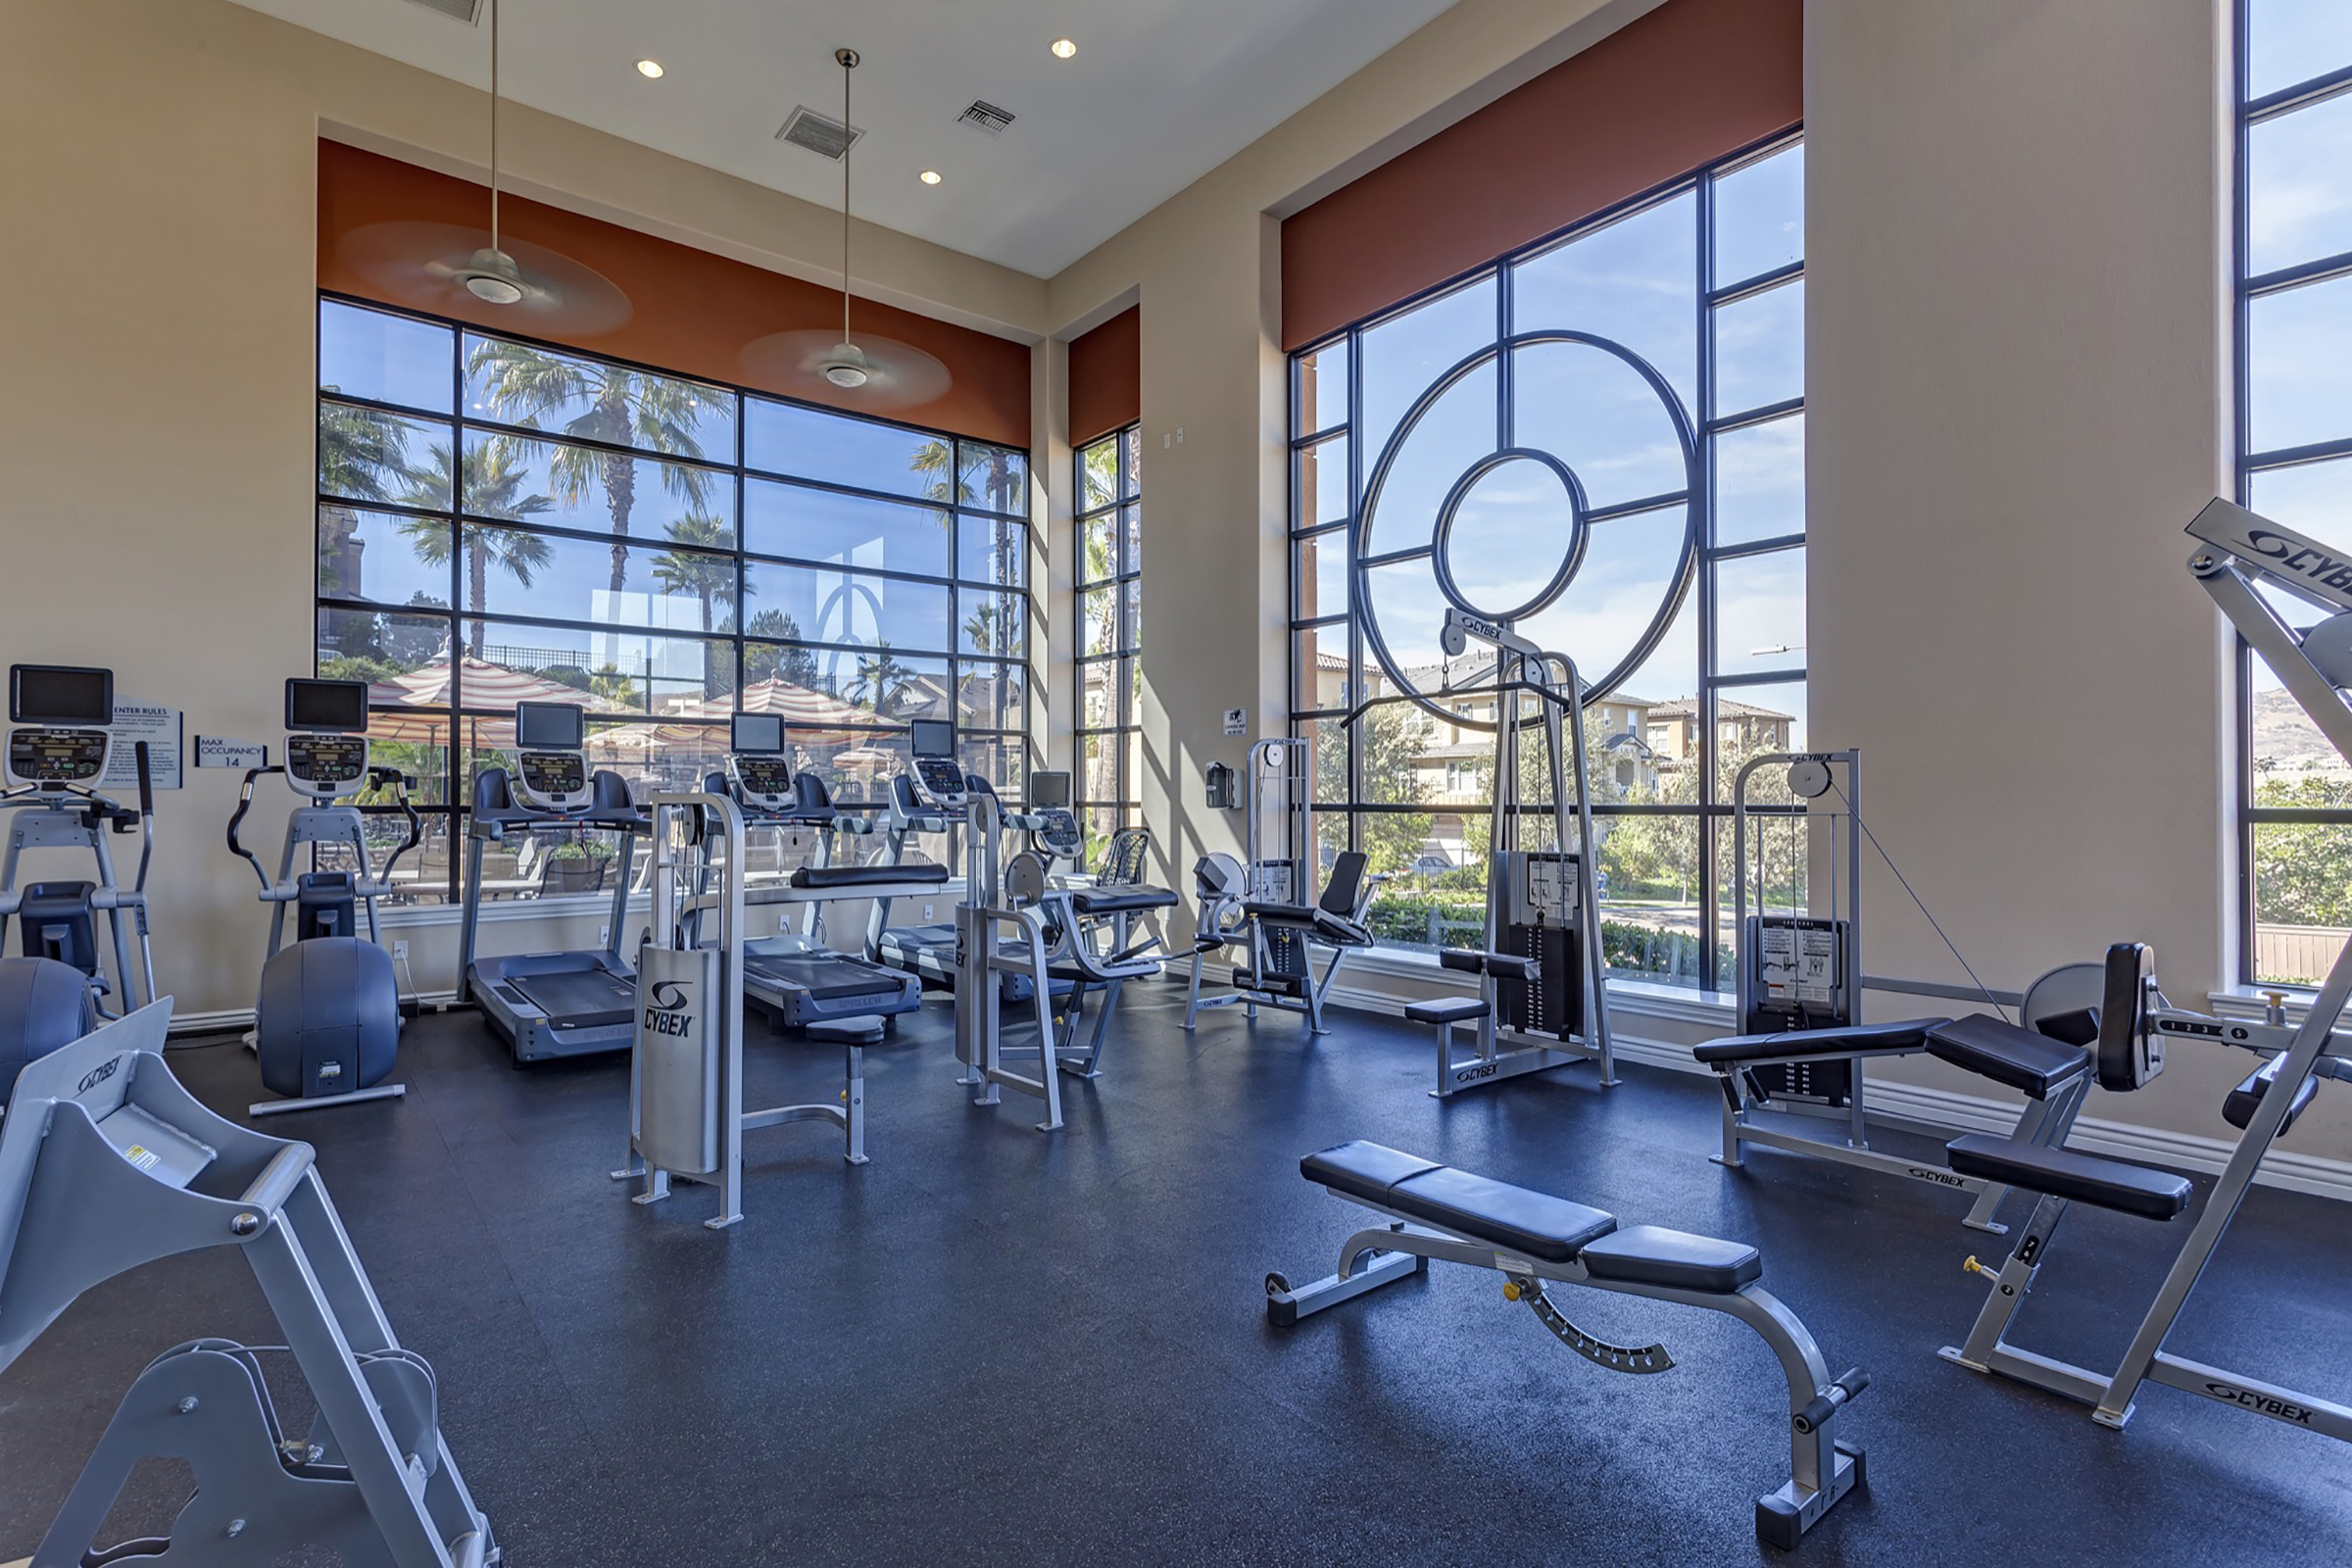 Well-lit fitness center with cardio and strength training equipment 